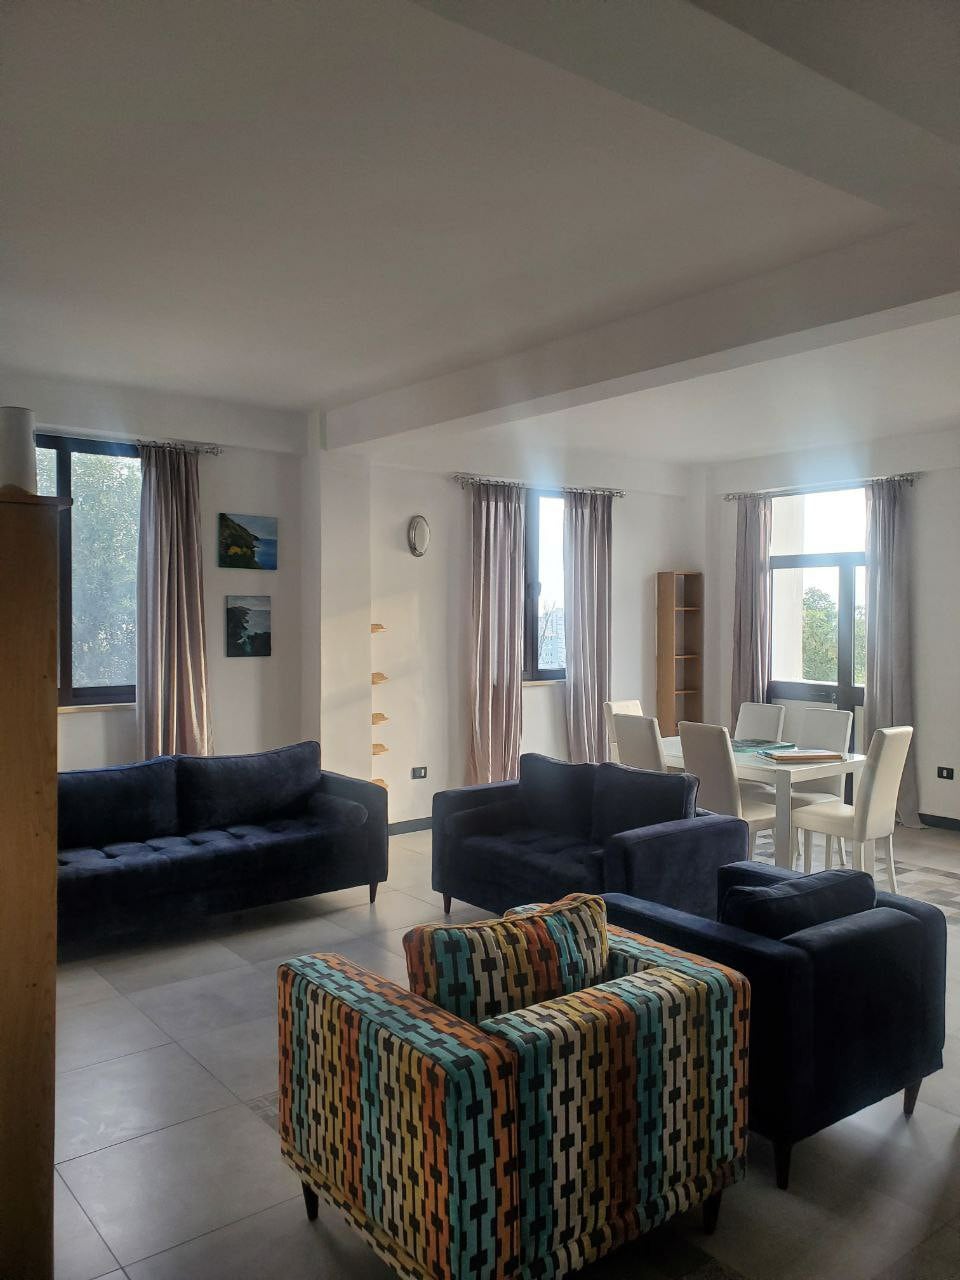 Leyo furnished Apartment 3 bedrooms.